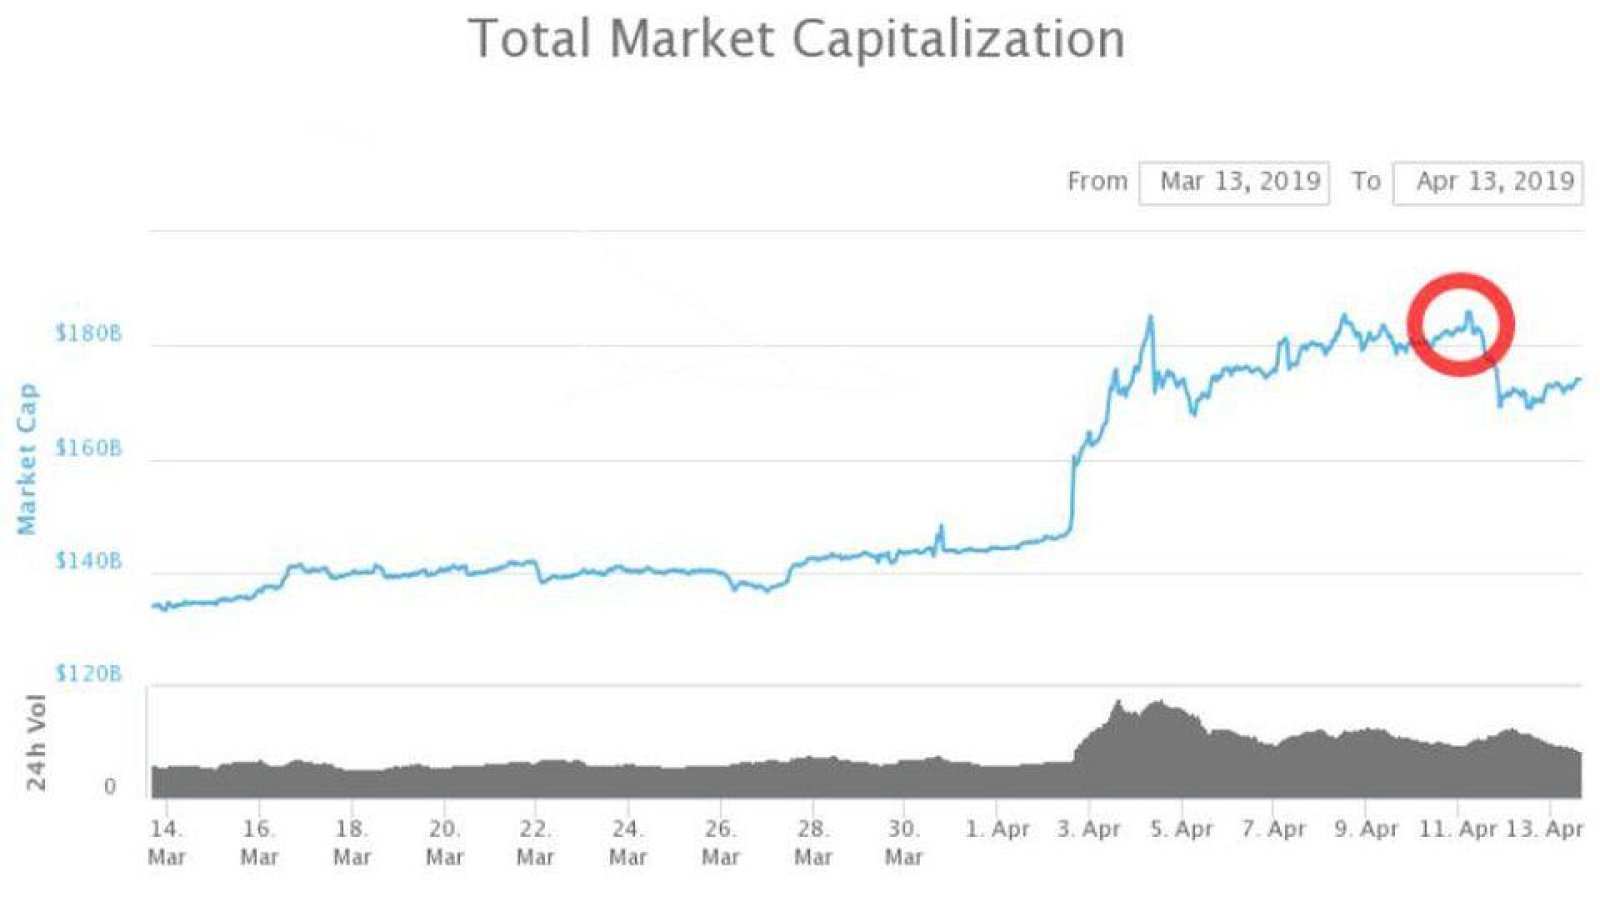 CoinMarketCap: the cryptocurrency market capitalization has hit its YTD high this week